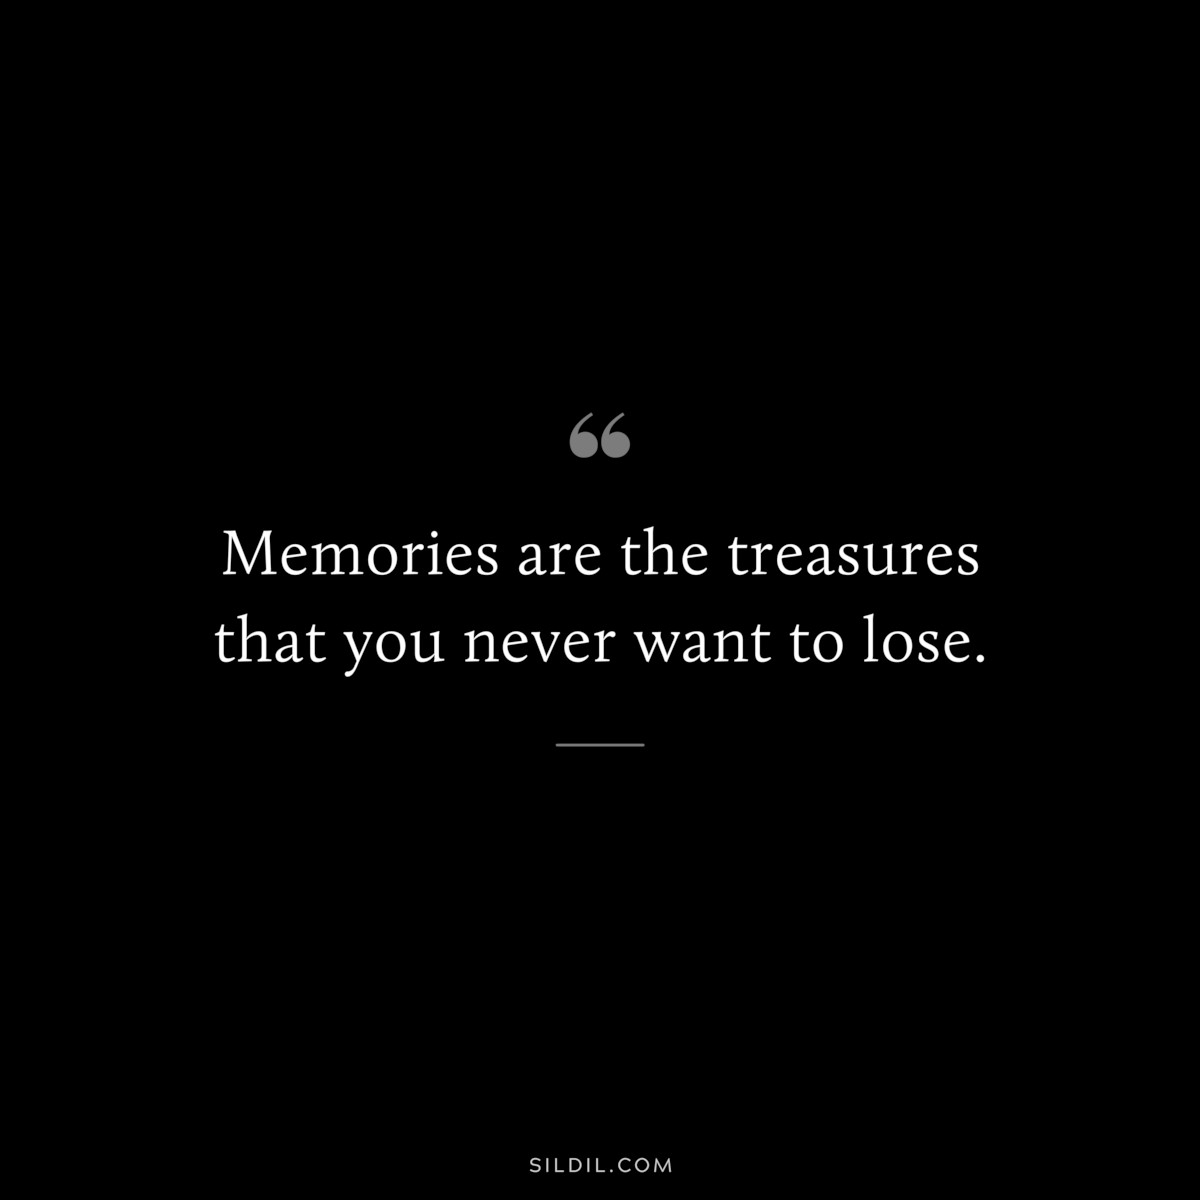 Memories are the treasures that you never want to lose.